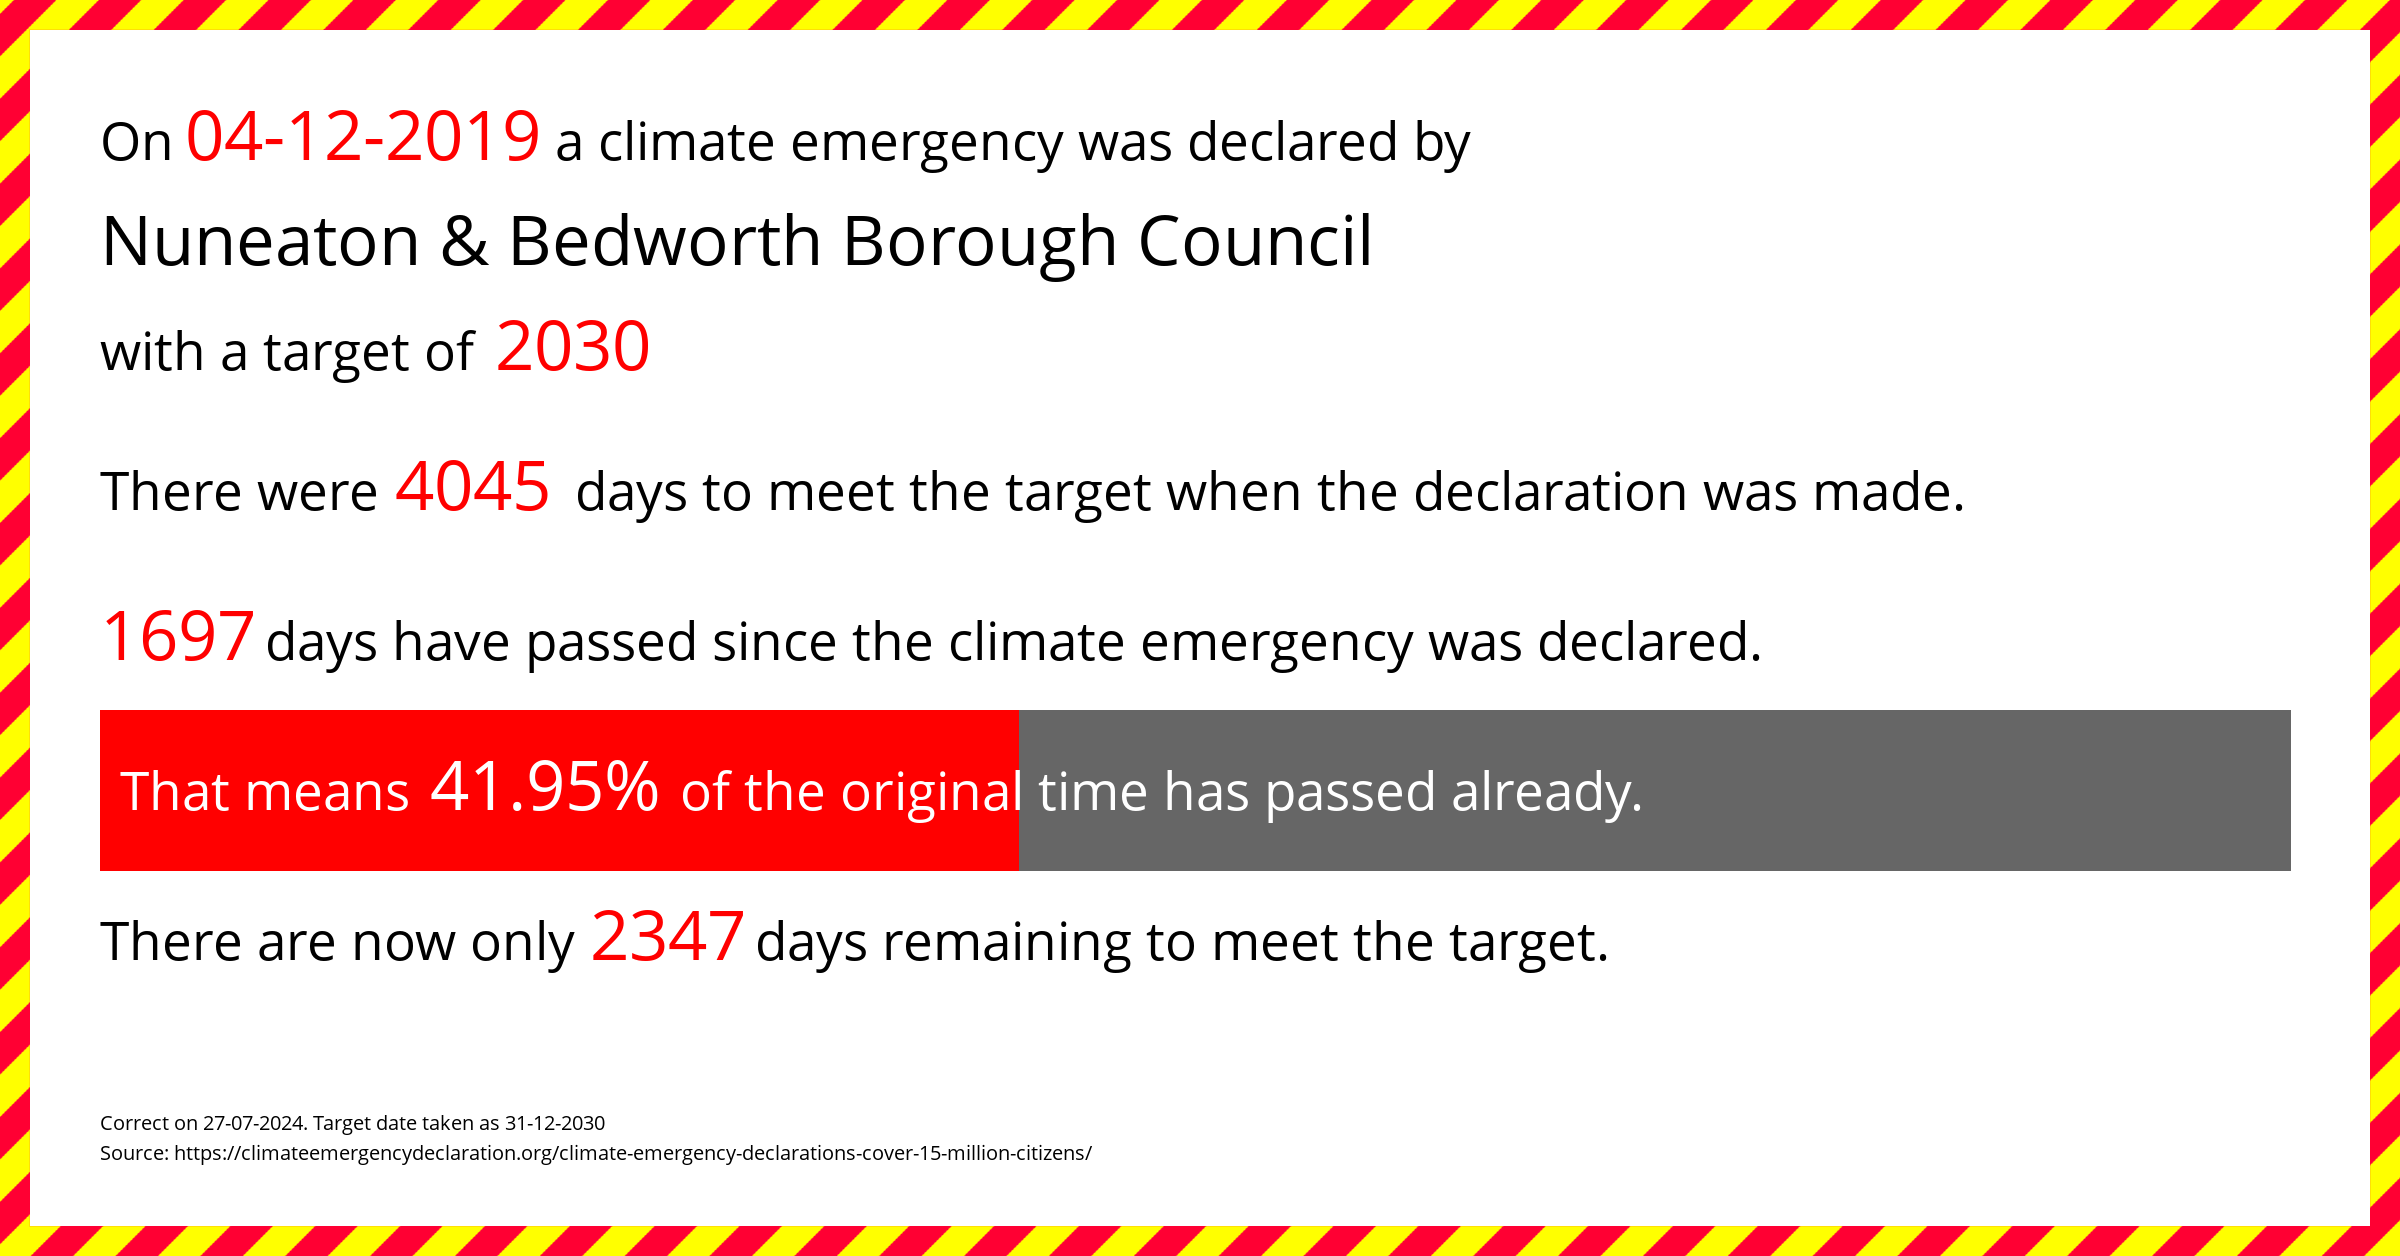 Nuneaton & Bedworth Borough Council declared a Climate emergency on Wednesday 4th December 2019, with a target of 2030.